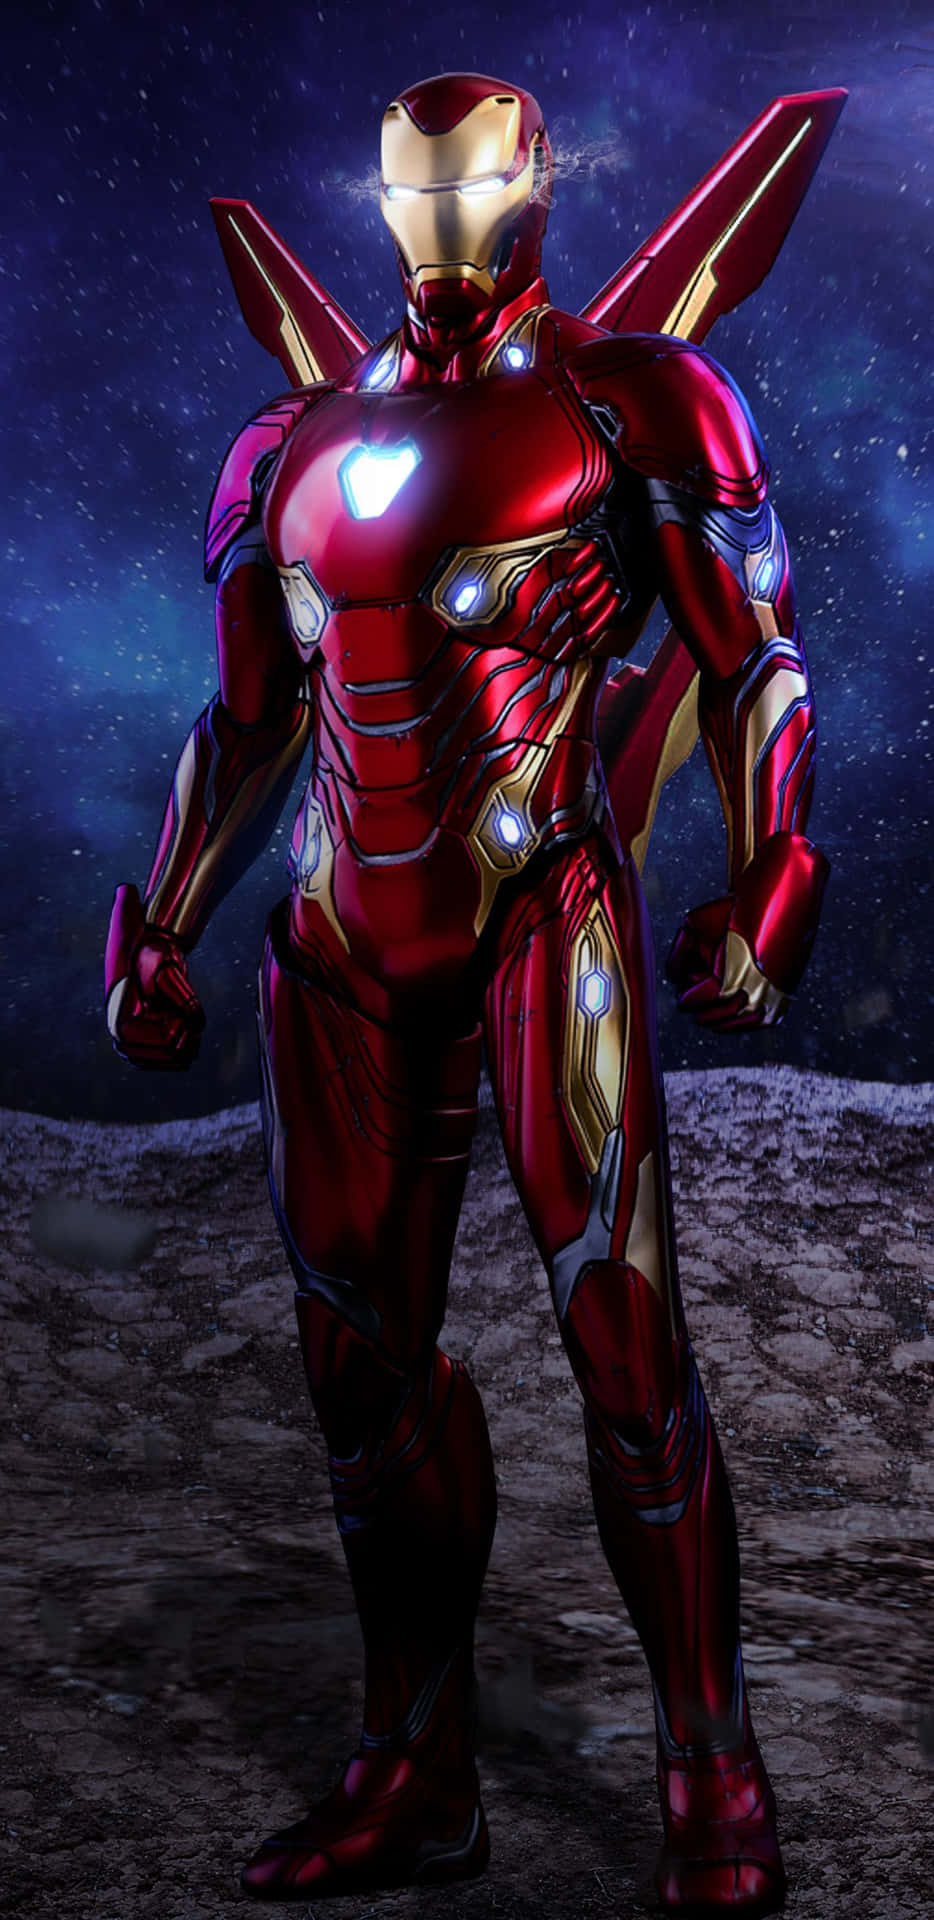 Iron Man joins The Avengers to fight for justice Wallpaper